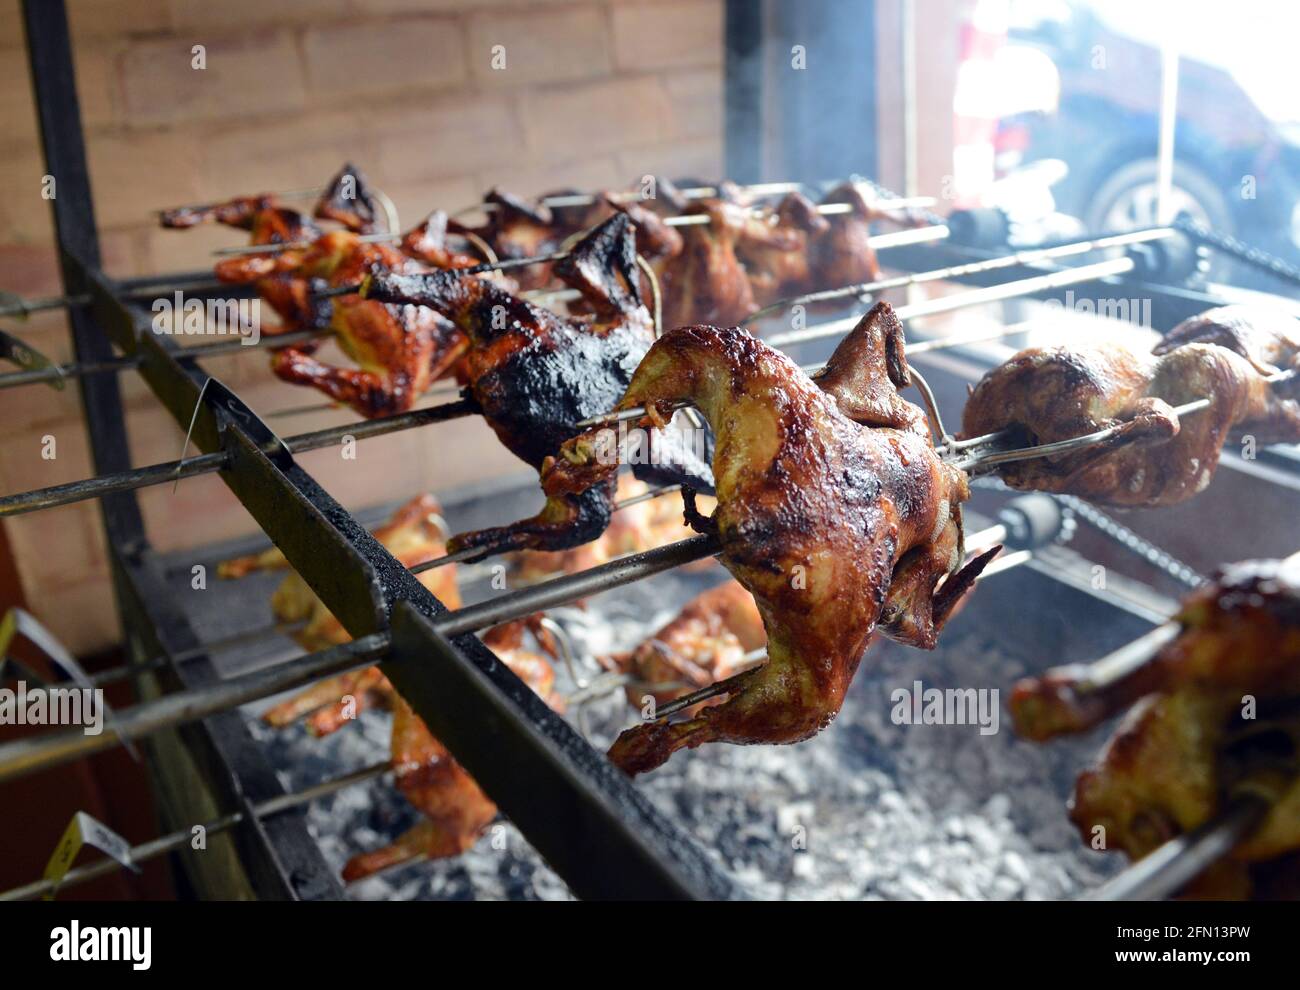 Lechon manok cooked over charcoal spit. Legazpi, Philippines. Stock Photo